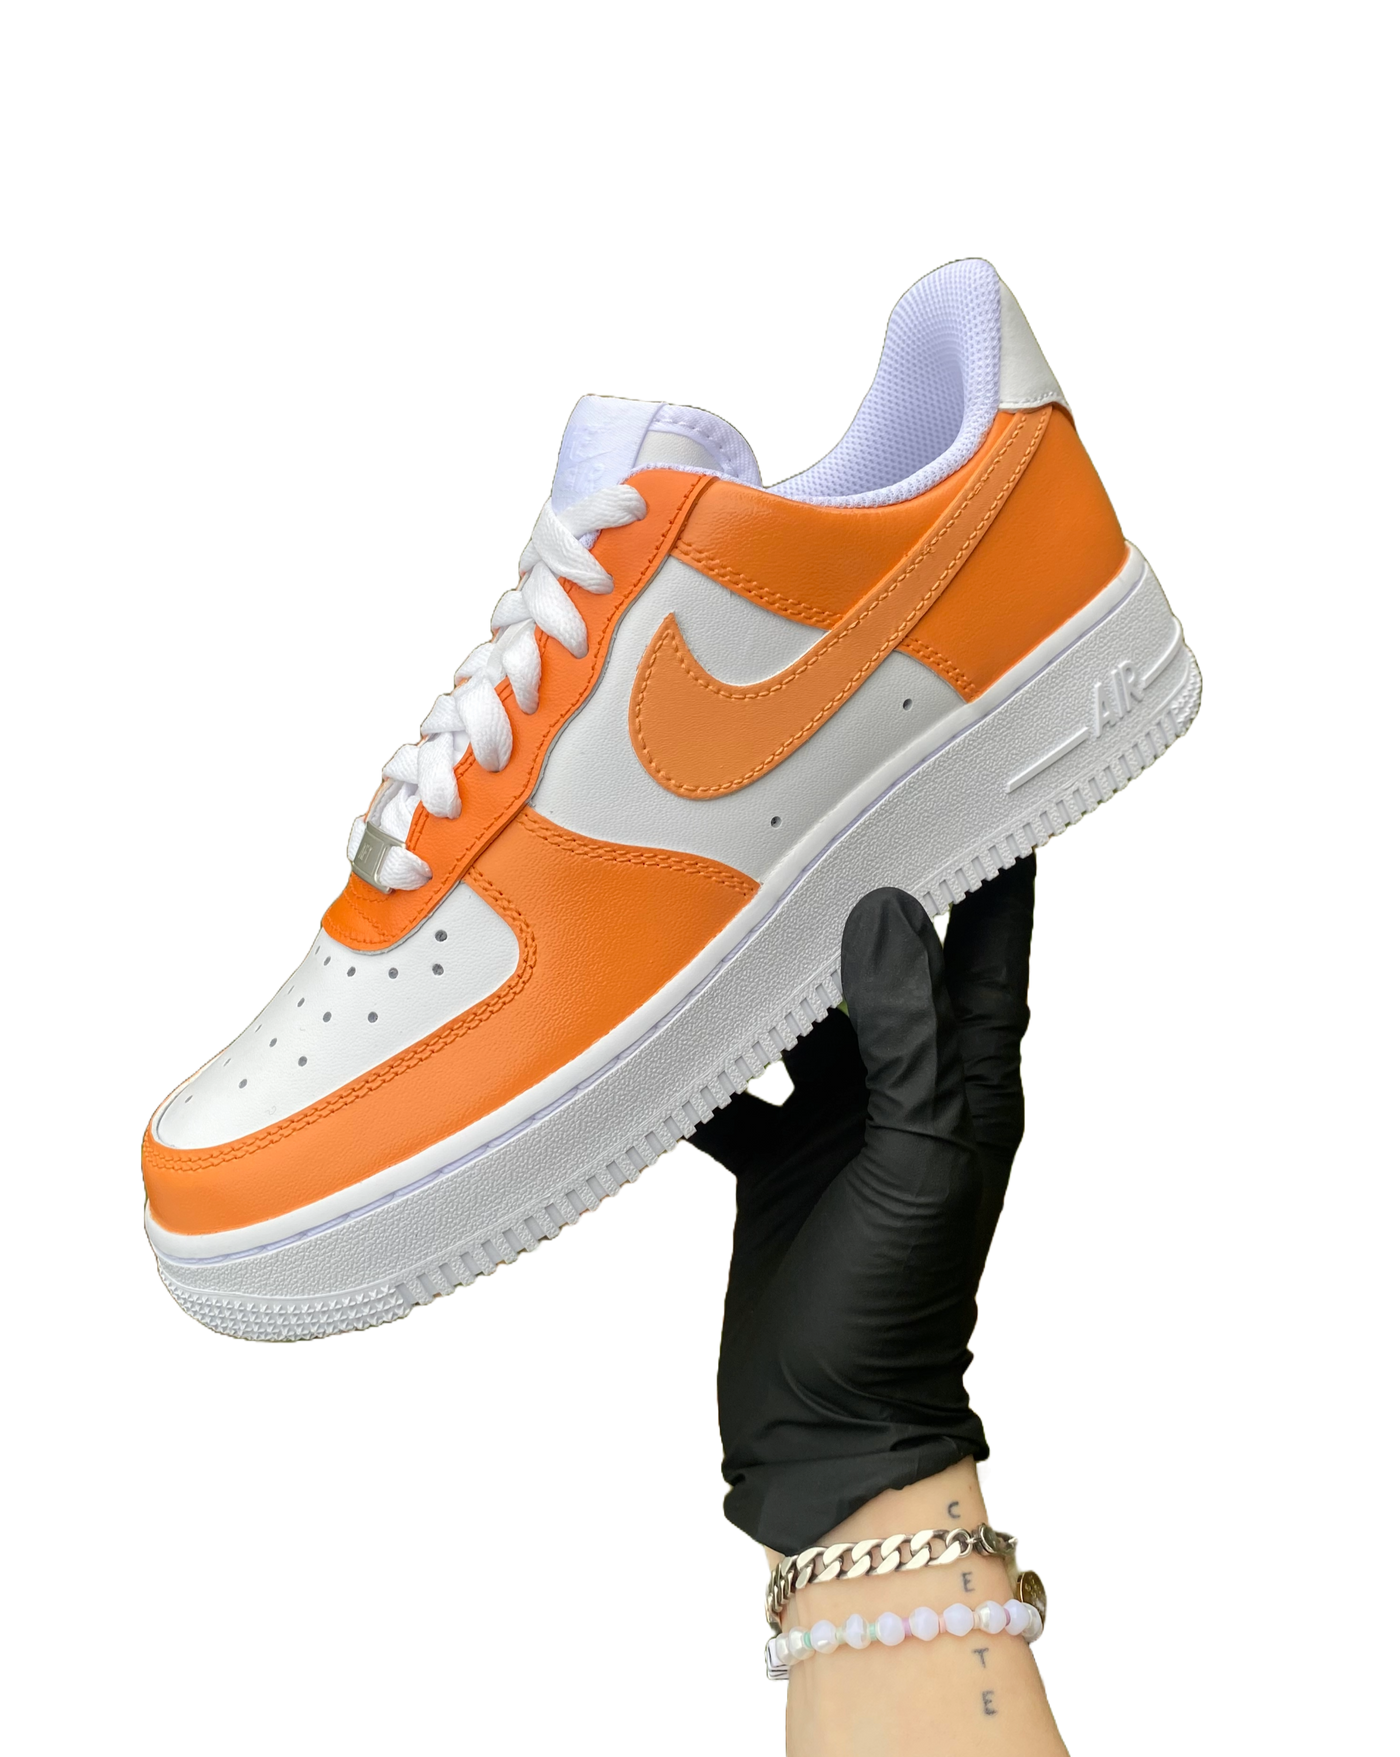 Artist's hand holding hand-painted orange colorway Air Force 1. There are 3 shades of orange worked into the colorway. Angle 1.